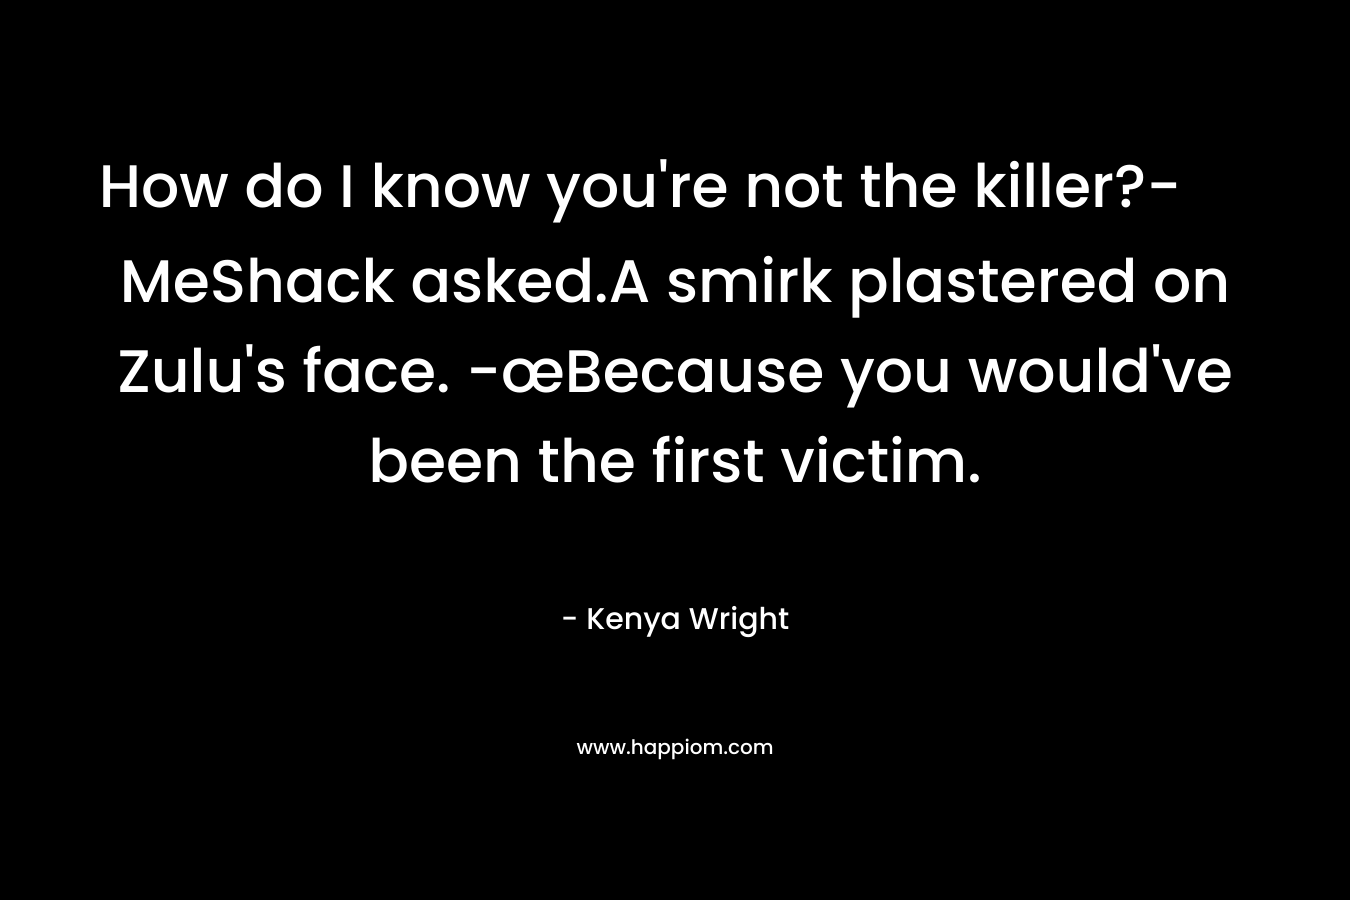 How do I know you’re not the killer?- MeShack asked.A smirk plastered on Zulu’s face. -œBecause you would’ve been the first victim. – Kenya Wright